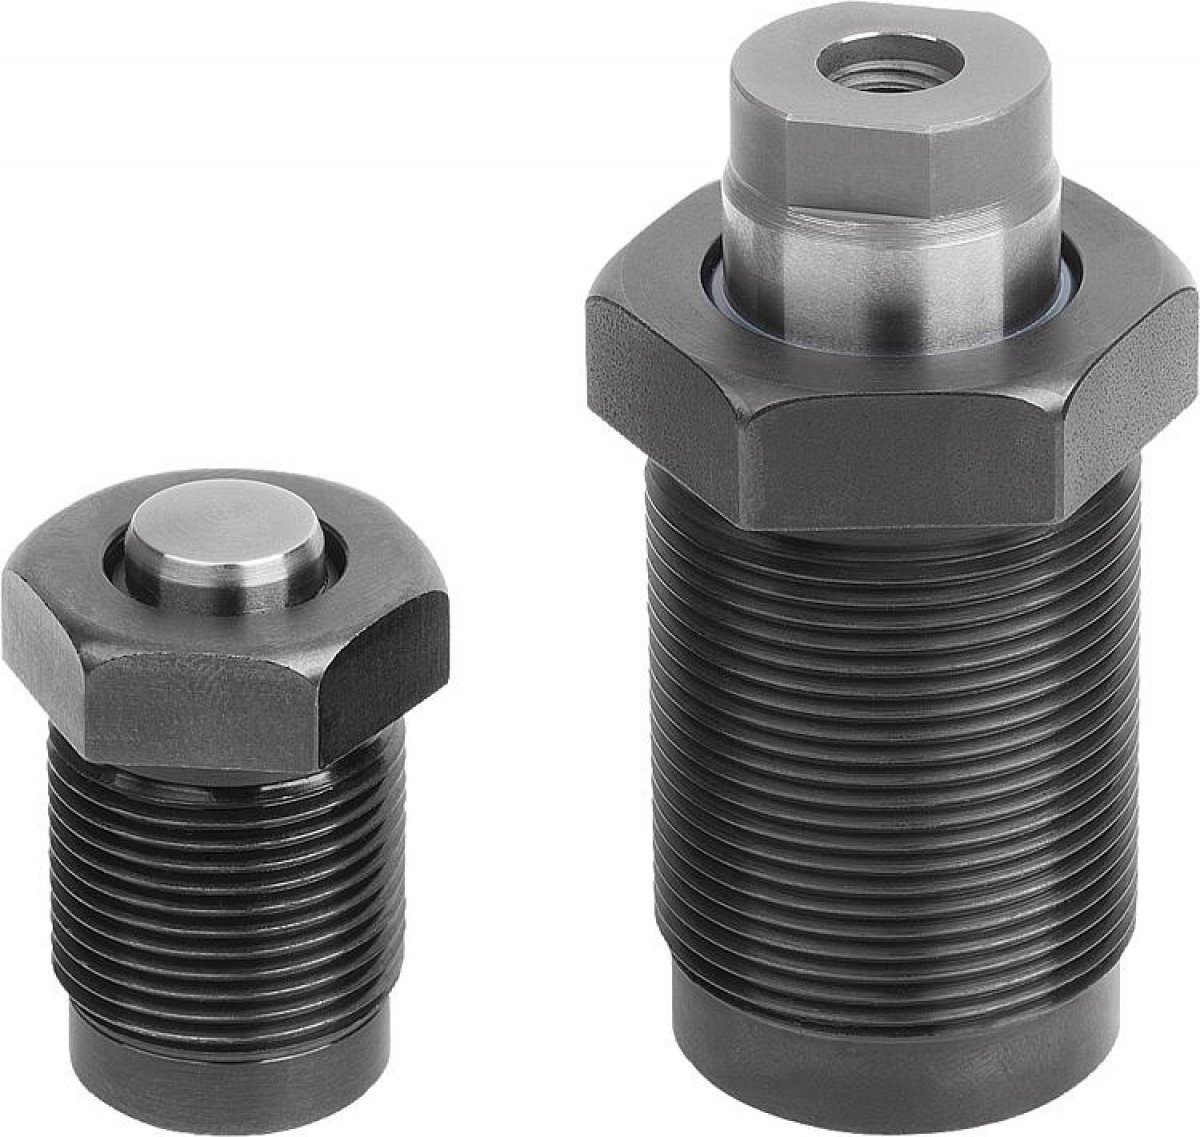 Screw-in hydraulic cylinder single-acting with spring return